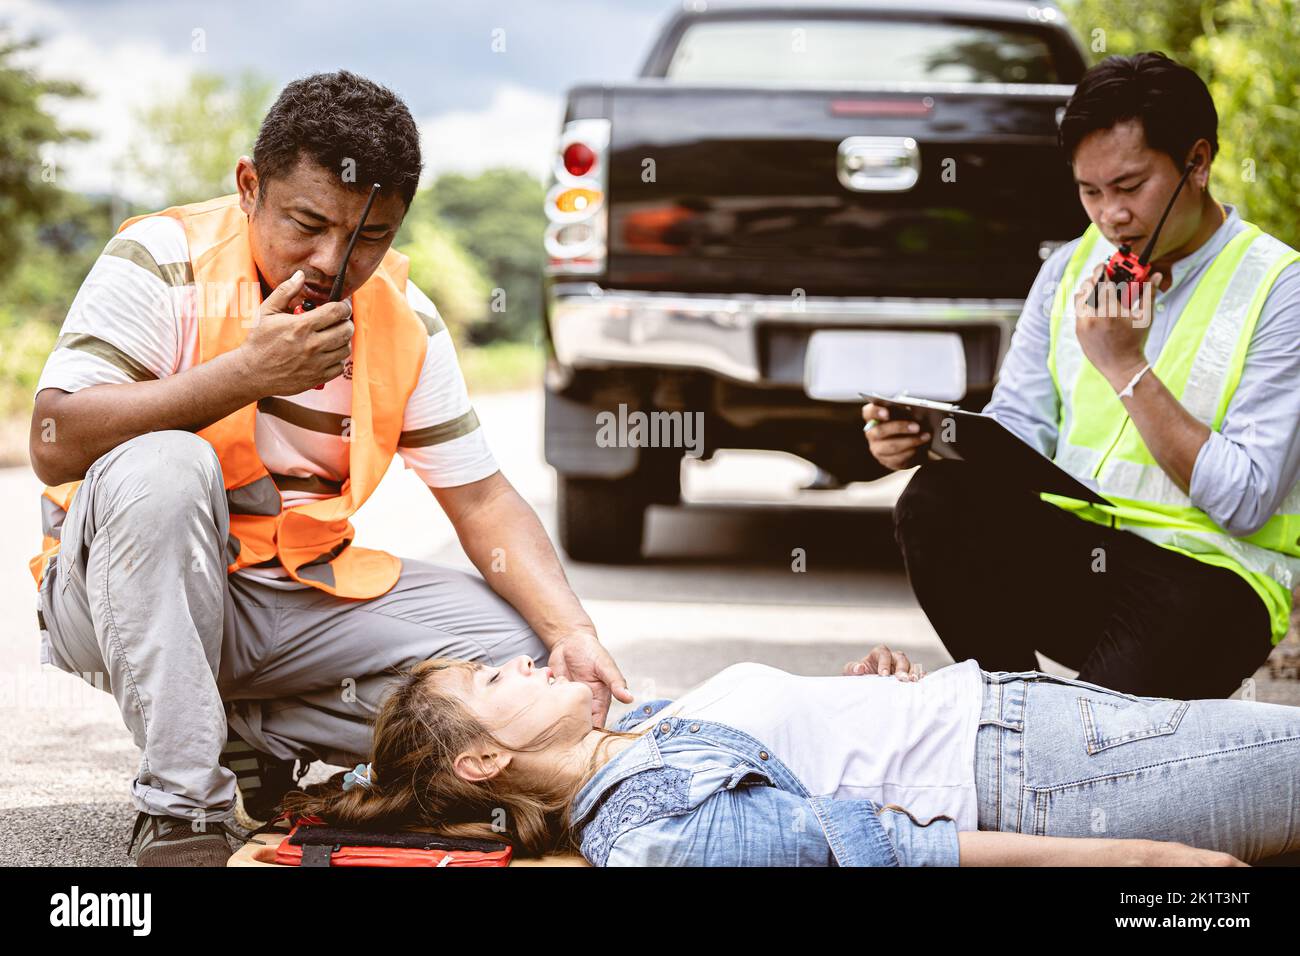 rescure team radio calling help support women victim hit by car at roadside accident scene Stock Photo